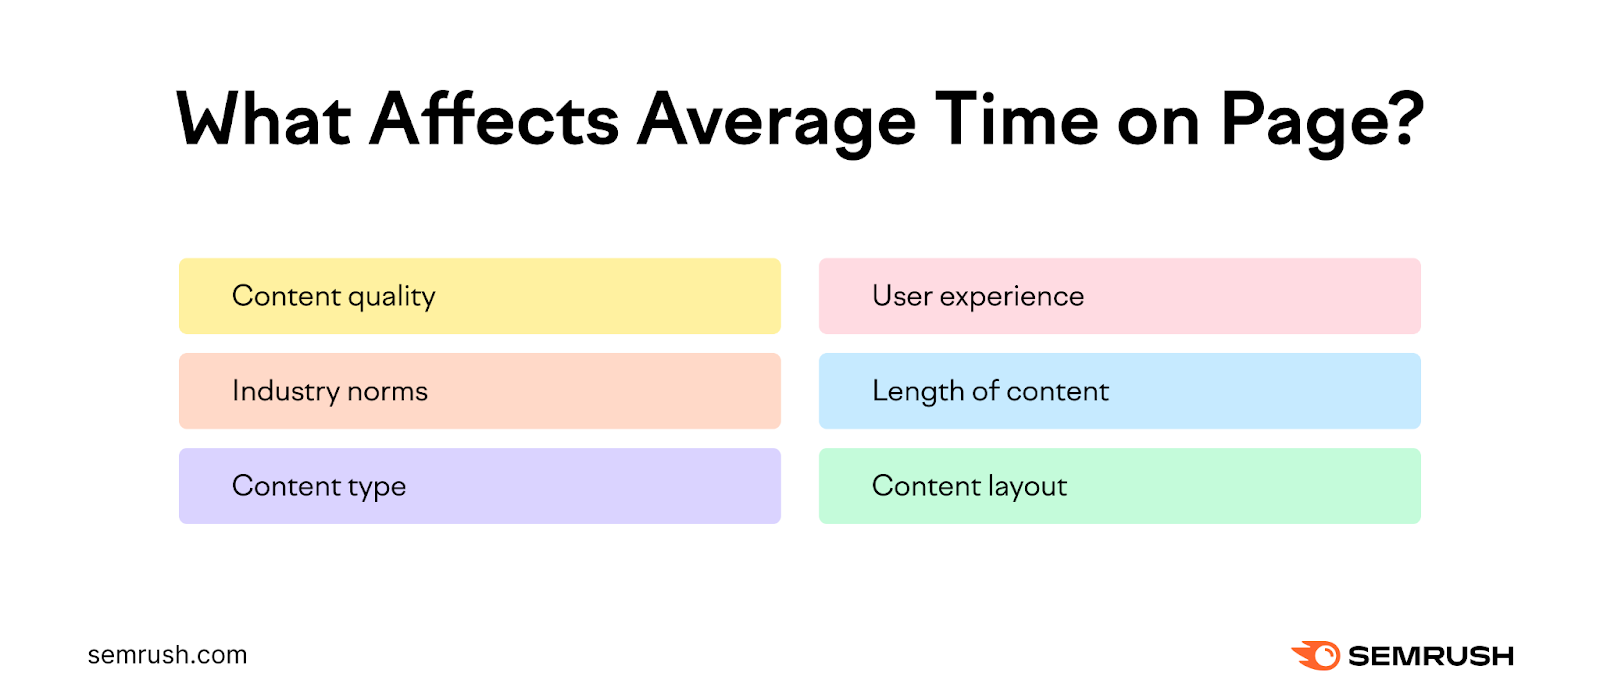 A visual listing what affects average time on page, including content quality, industry norms, content type, user experience, length of content, and content layout